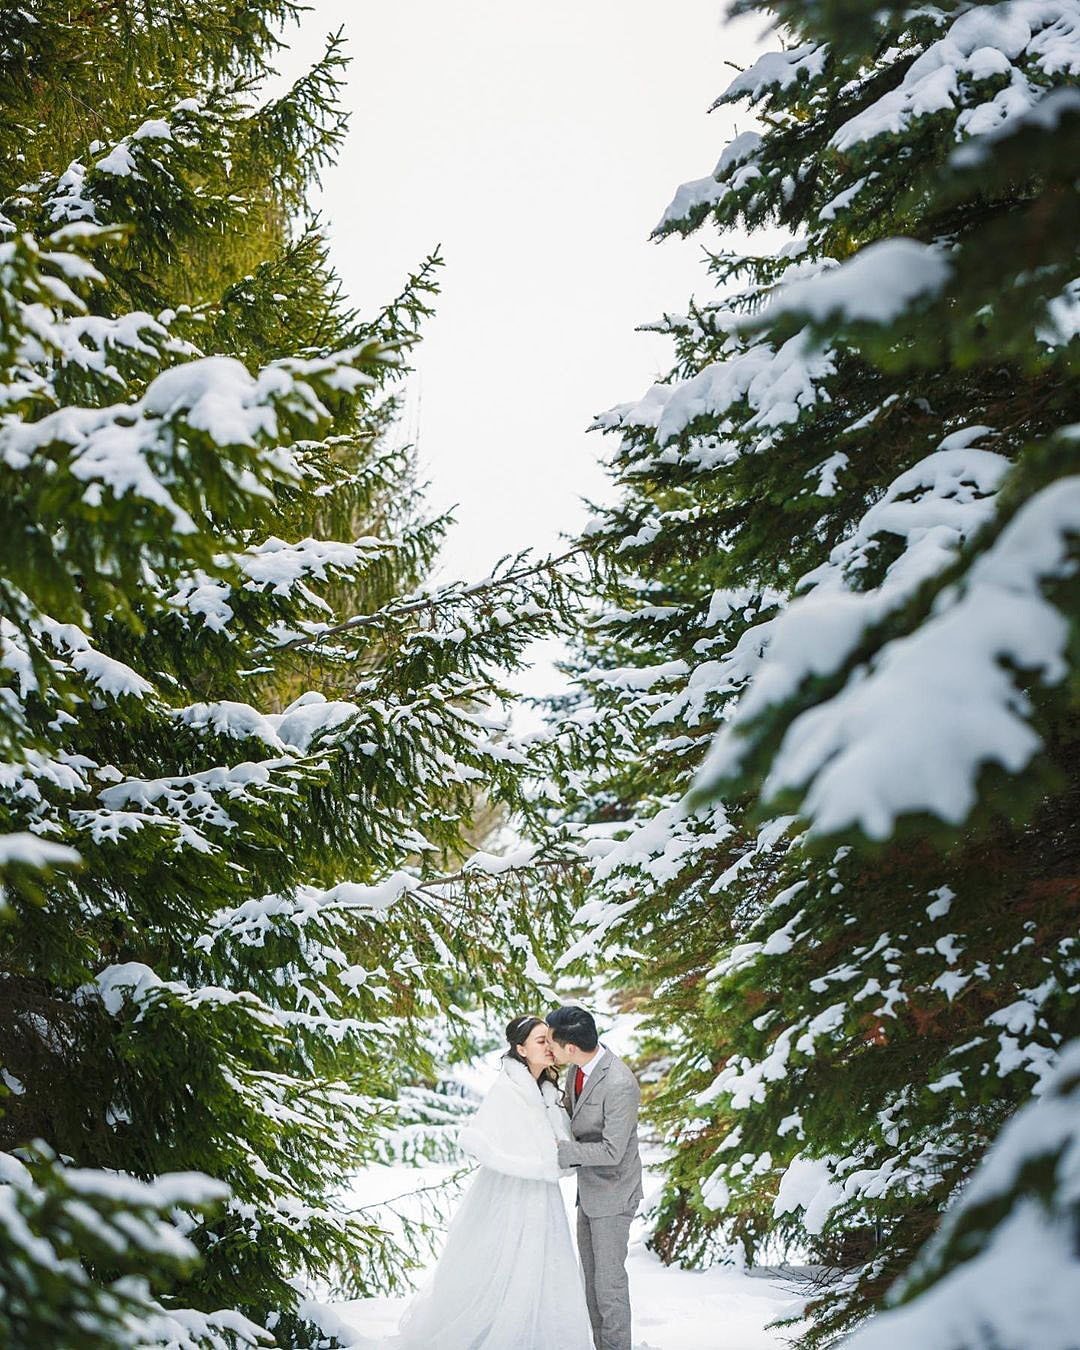 winter wedding photo ideas couple romantic in the forest